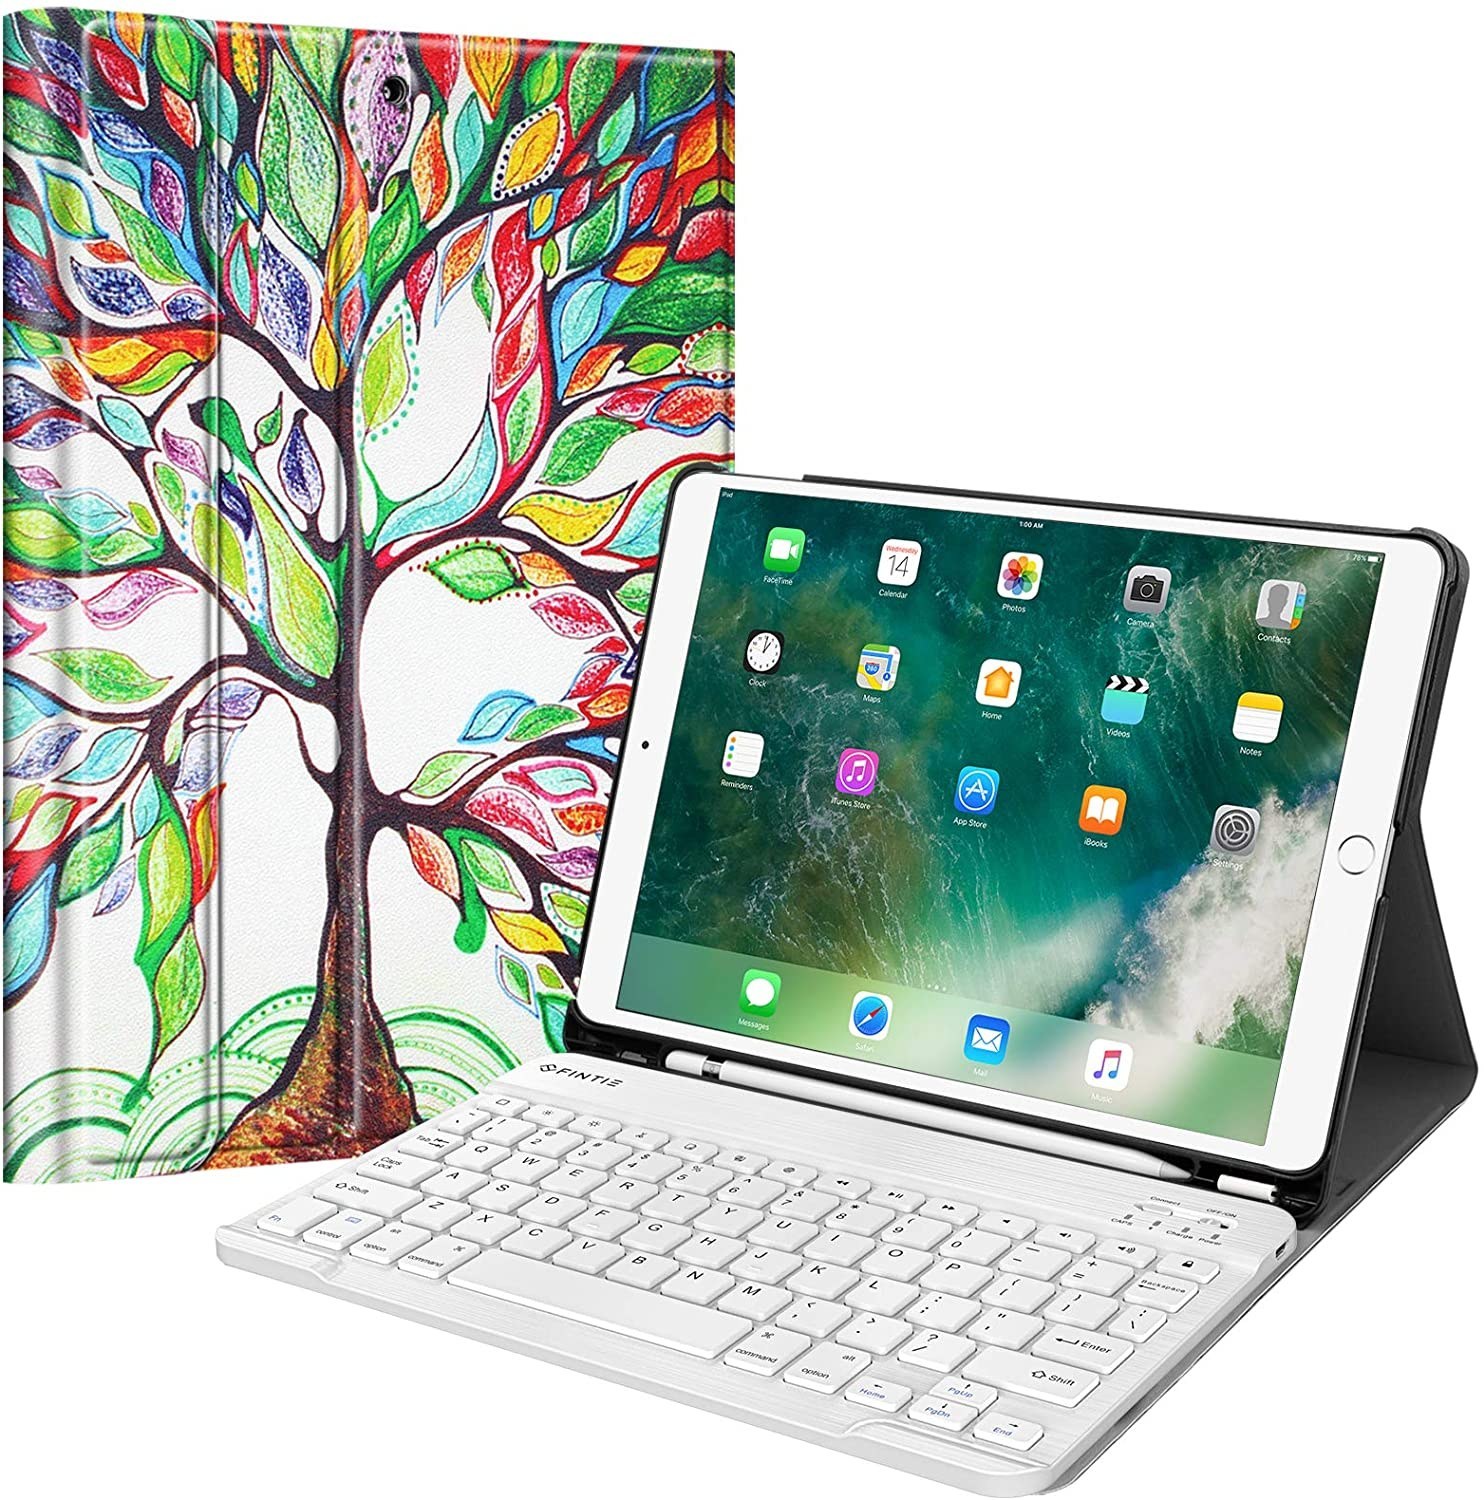 iPad Air 1/2 Slim Shell Stand Cover w/Magnetically Detachable Wireless Bluetooth Keyboard for iPad 6th / 5th Gen Fintie iPad 9.7 2018 2017 / iPad Air 2 / iPad Air Keyboard Case Moroccan Love 